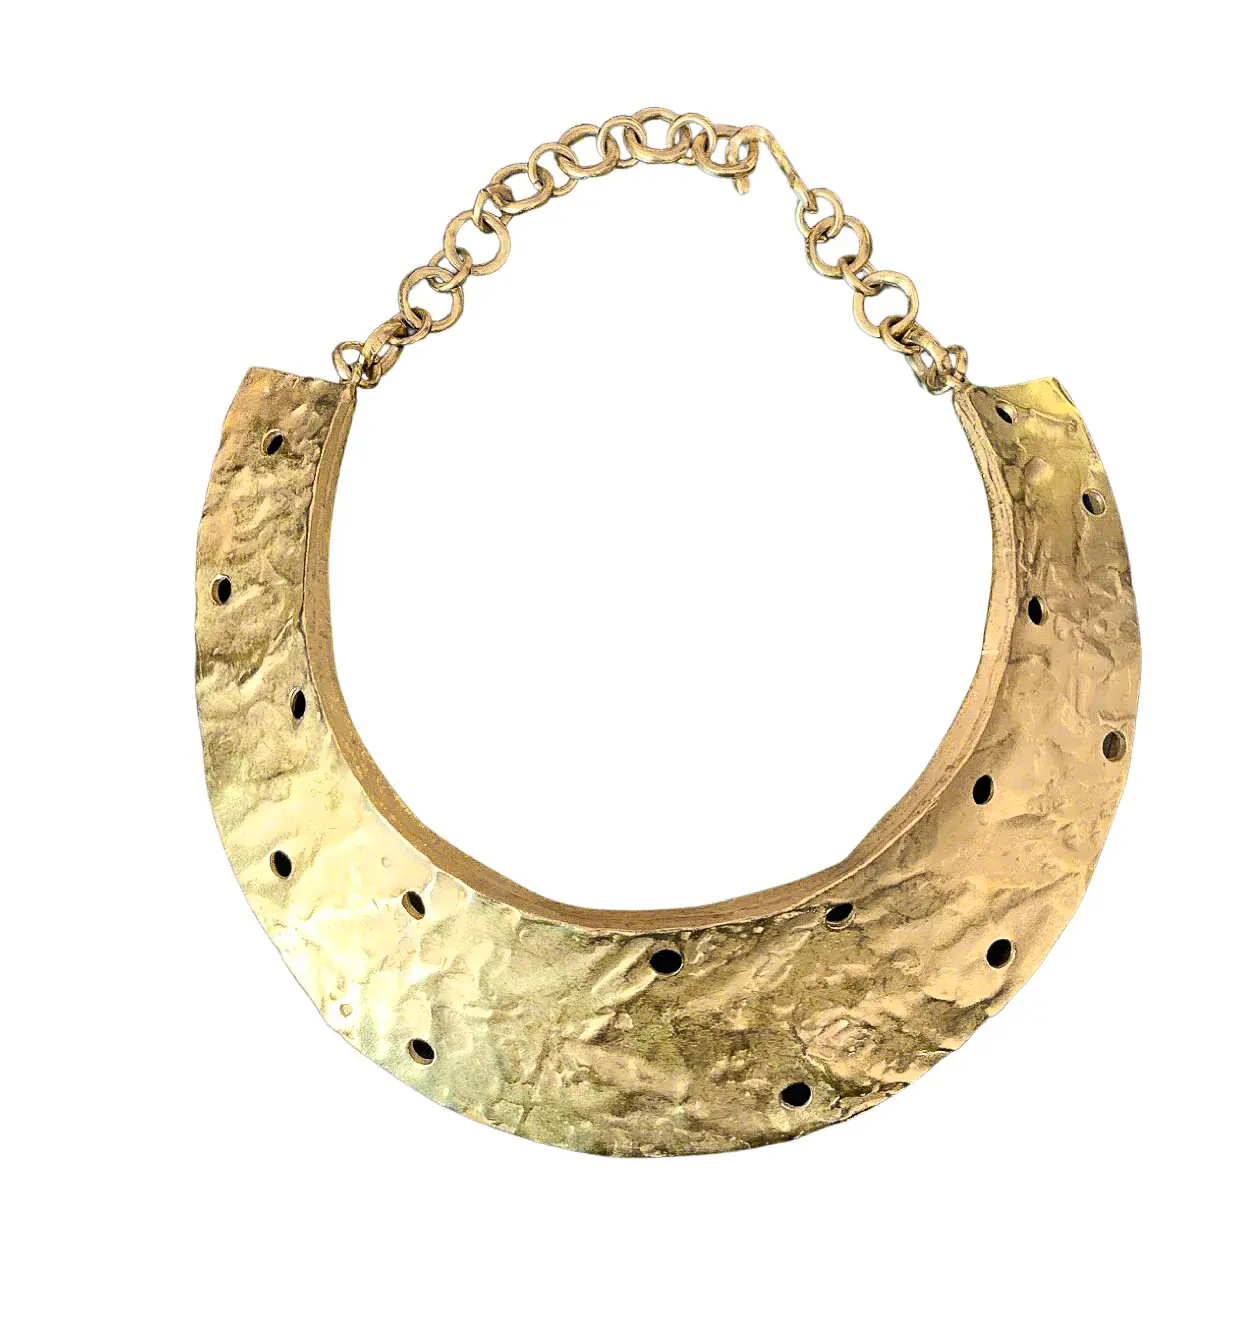 Hot selling brass necklace charming shiny polished Household Party Wearing use brass necklace handicraft wholesale price